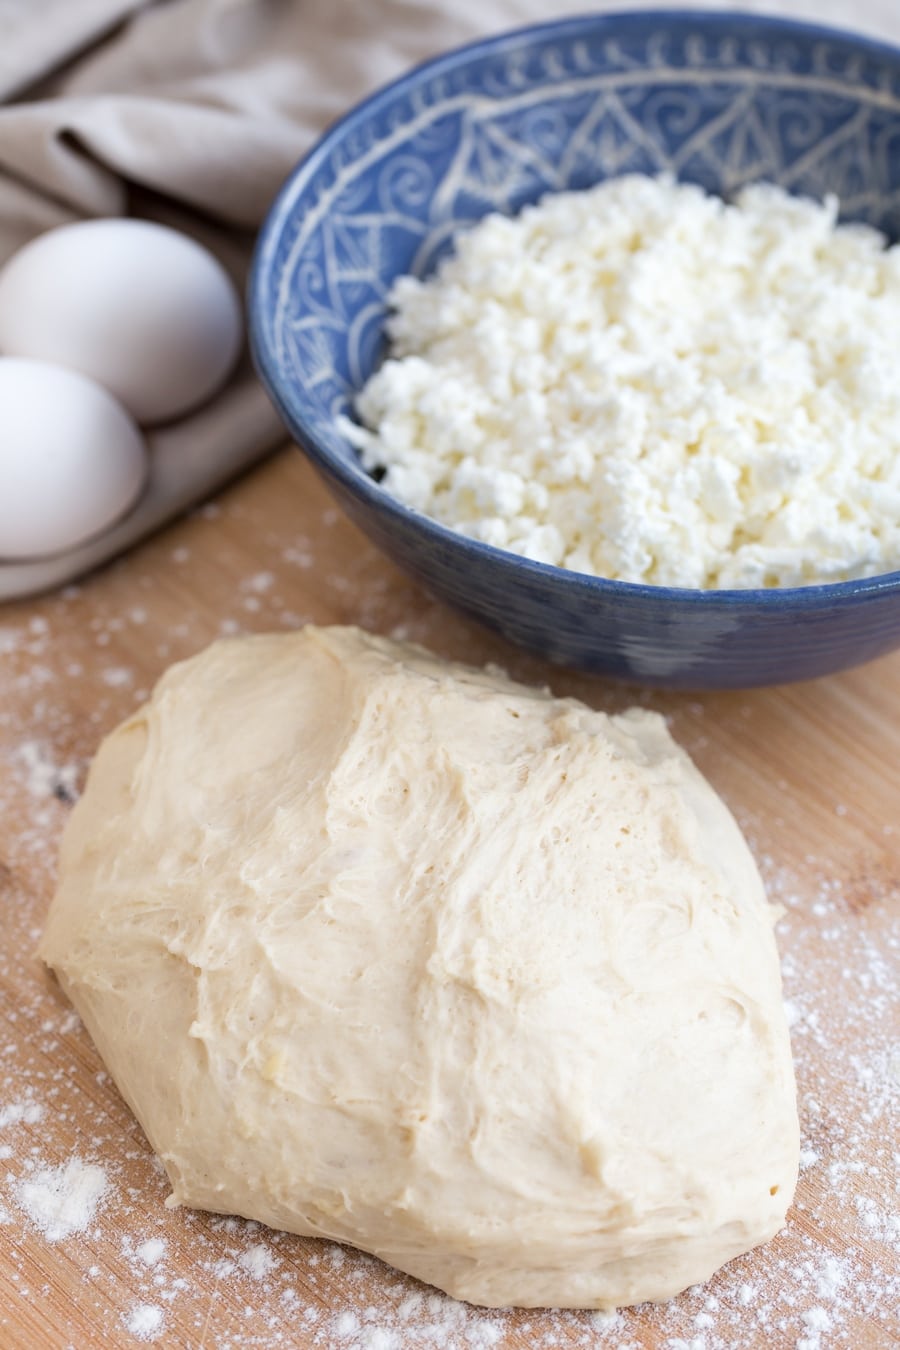 Ball of dough on floured wooden board, bowl with shredded cheeseand eggs in the background.